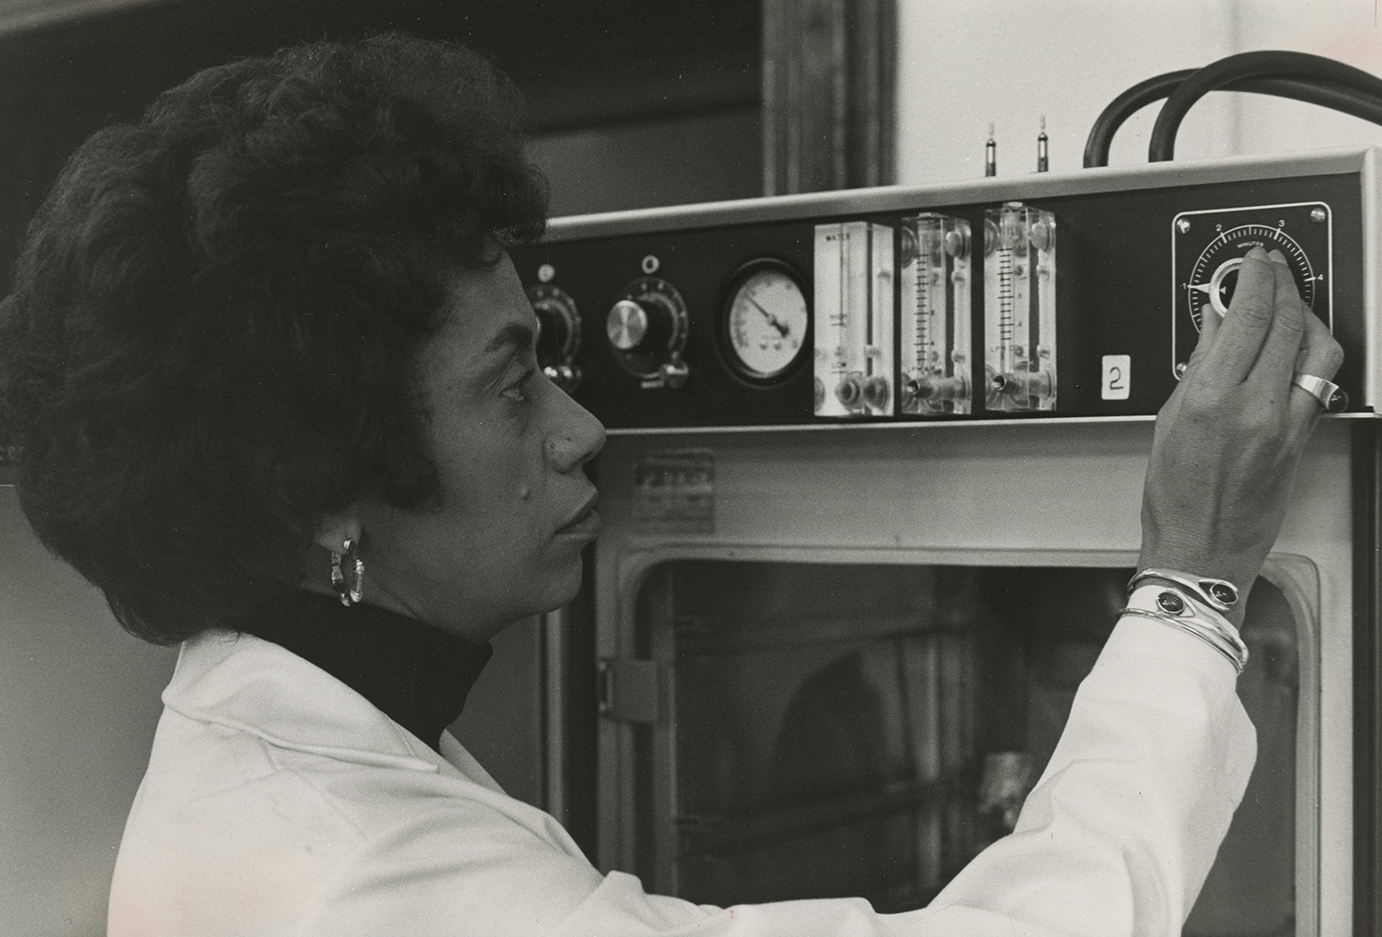 Jewel Plummer Cobb. Linda Lear Center for Special Collections and Archives, Connecticut College